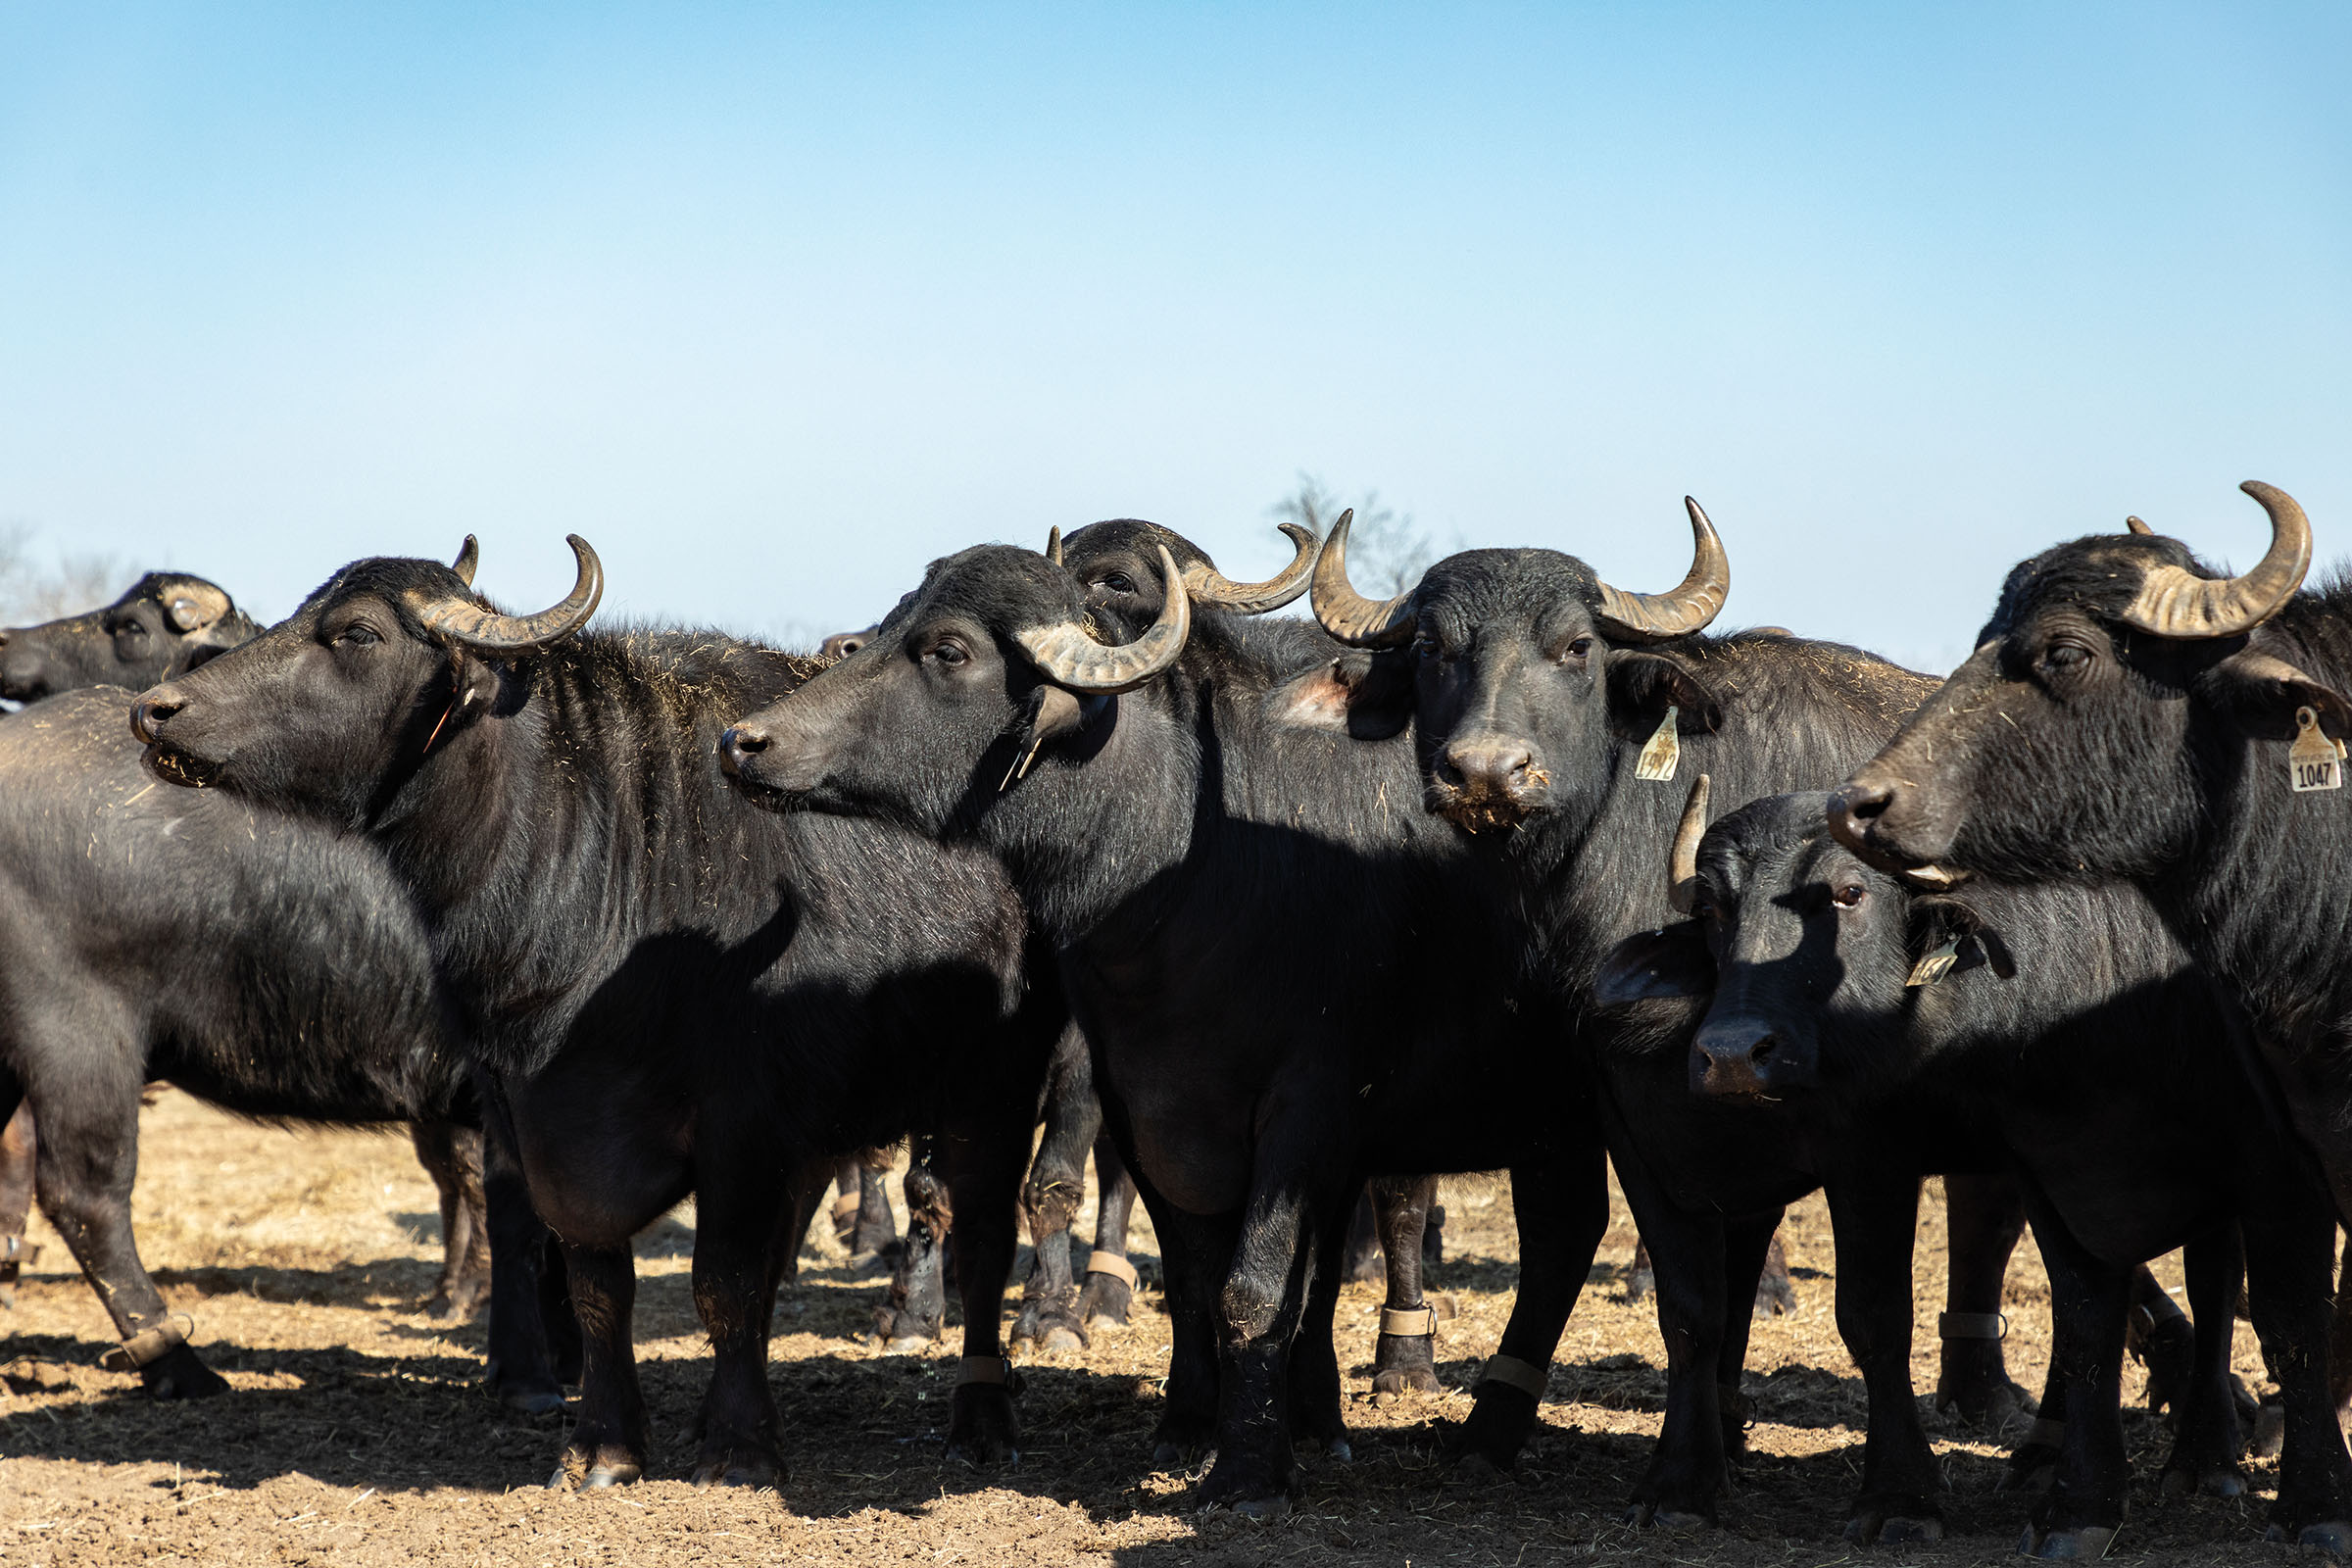 A herd of black animals with curved horns under a blue sky